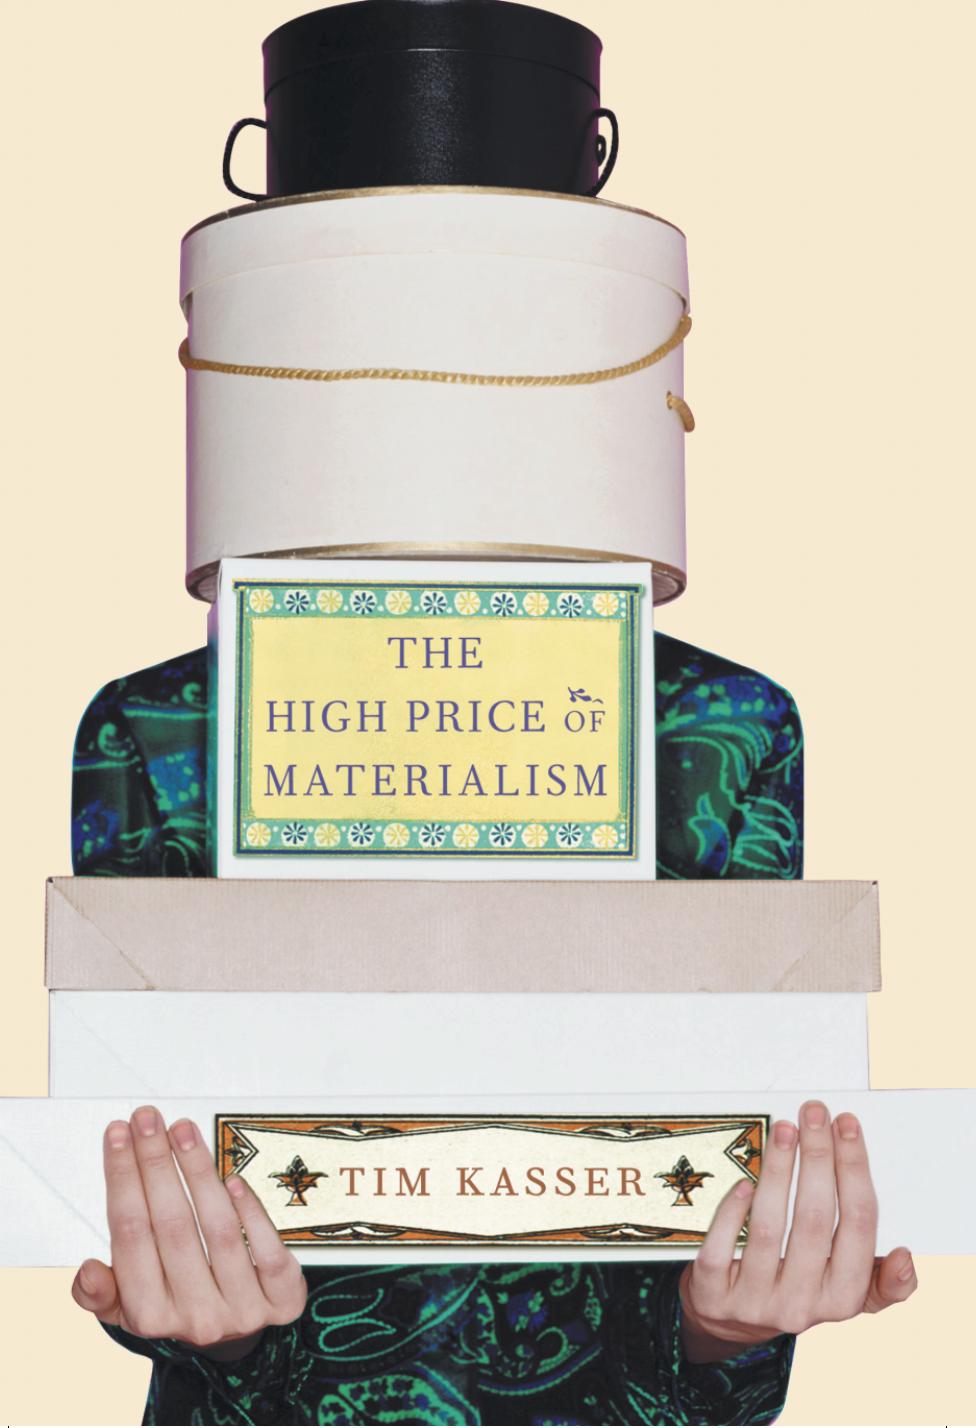 The High Price of Materialism by Tim Kasser